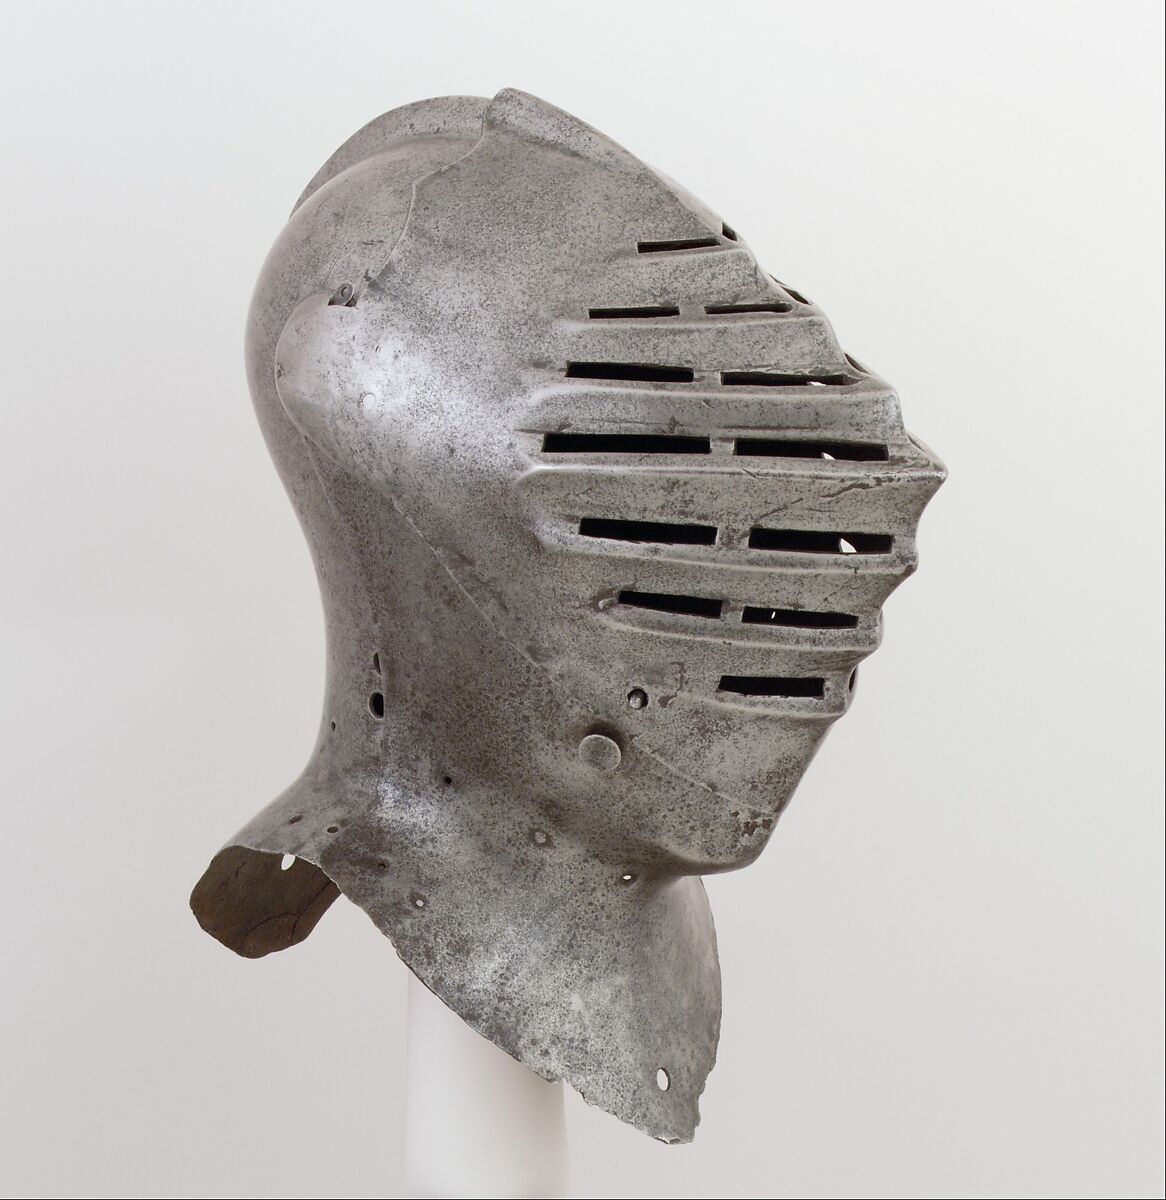 Tournament Helm, Steel, copper alloy, Anglo-Flemish